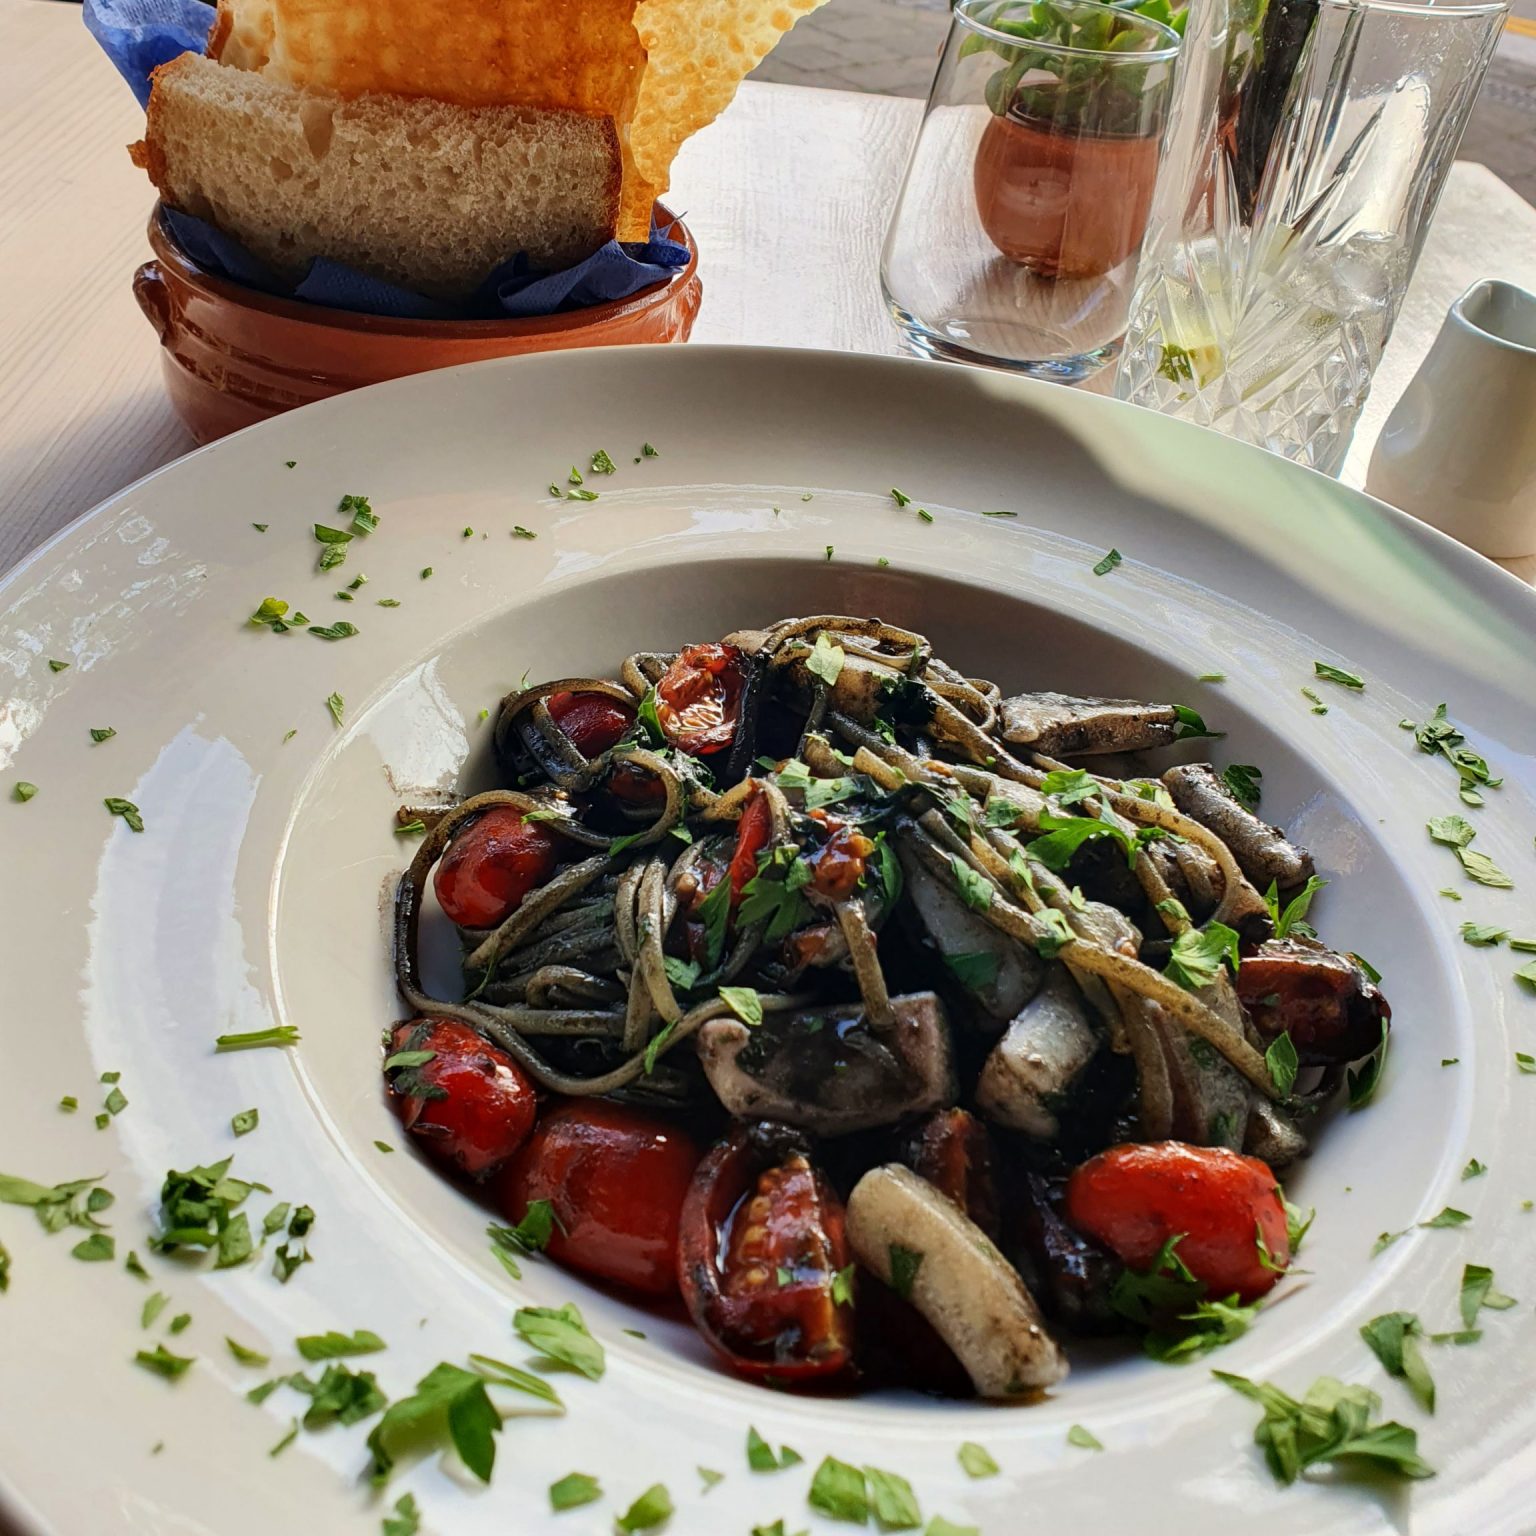 Nero di seppia, a dish made from tender fresh cuttlefish cooked in a sauce containing its own ink